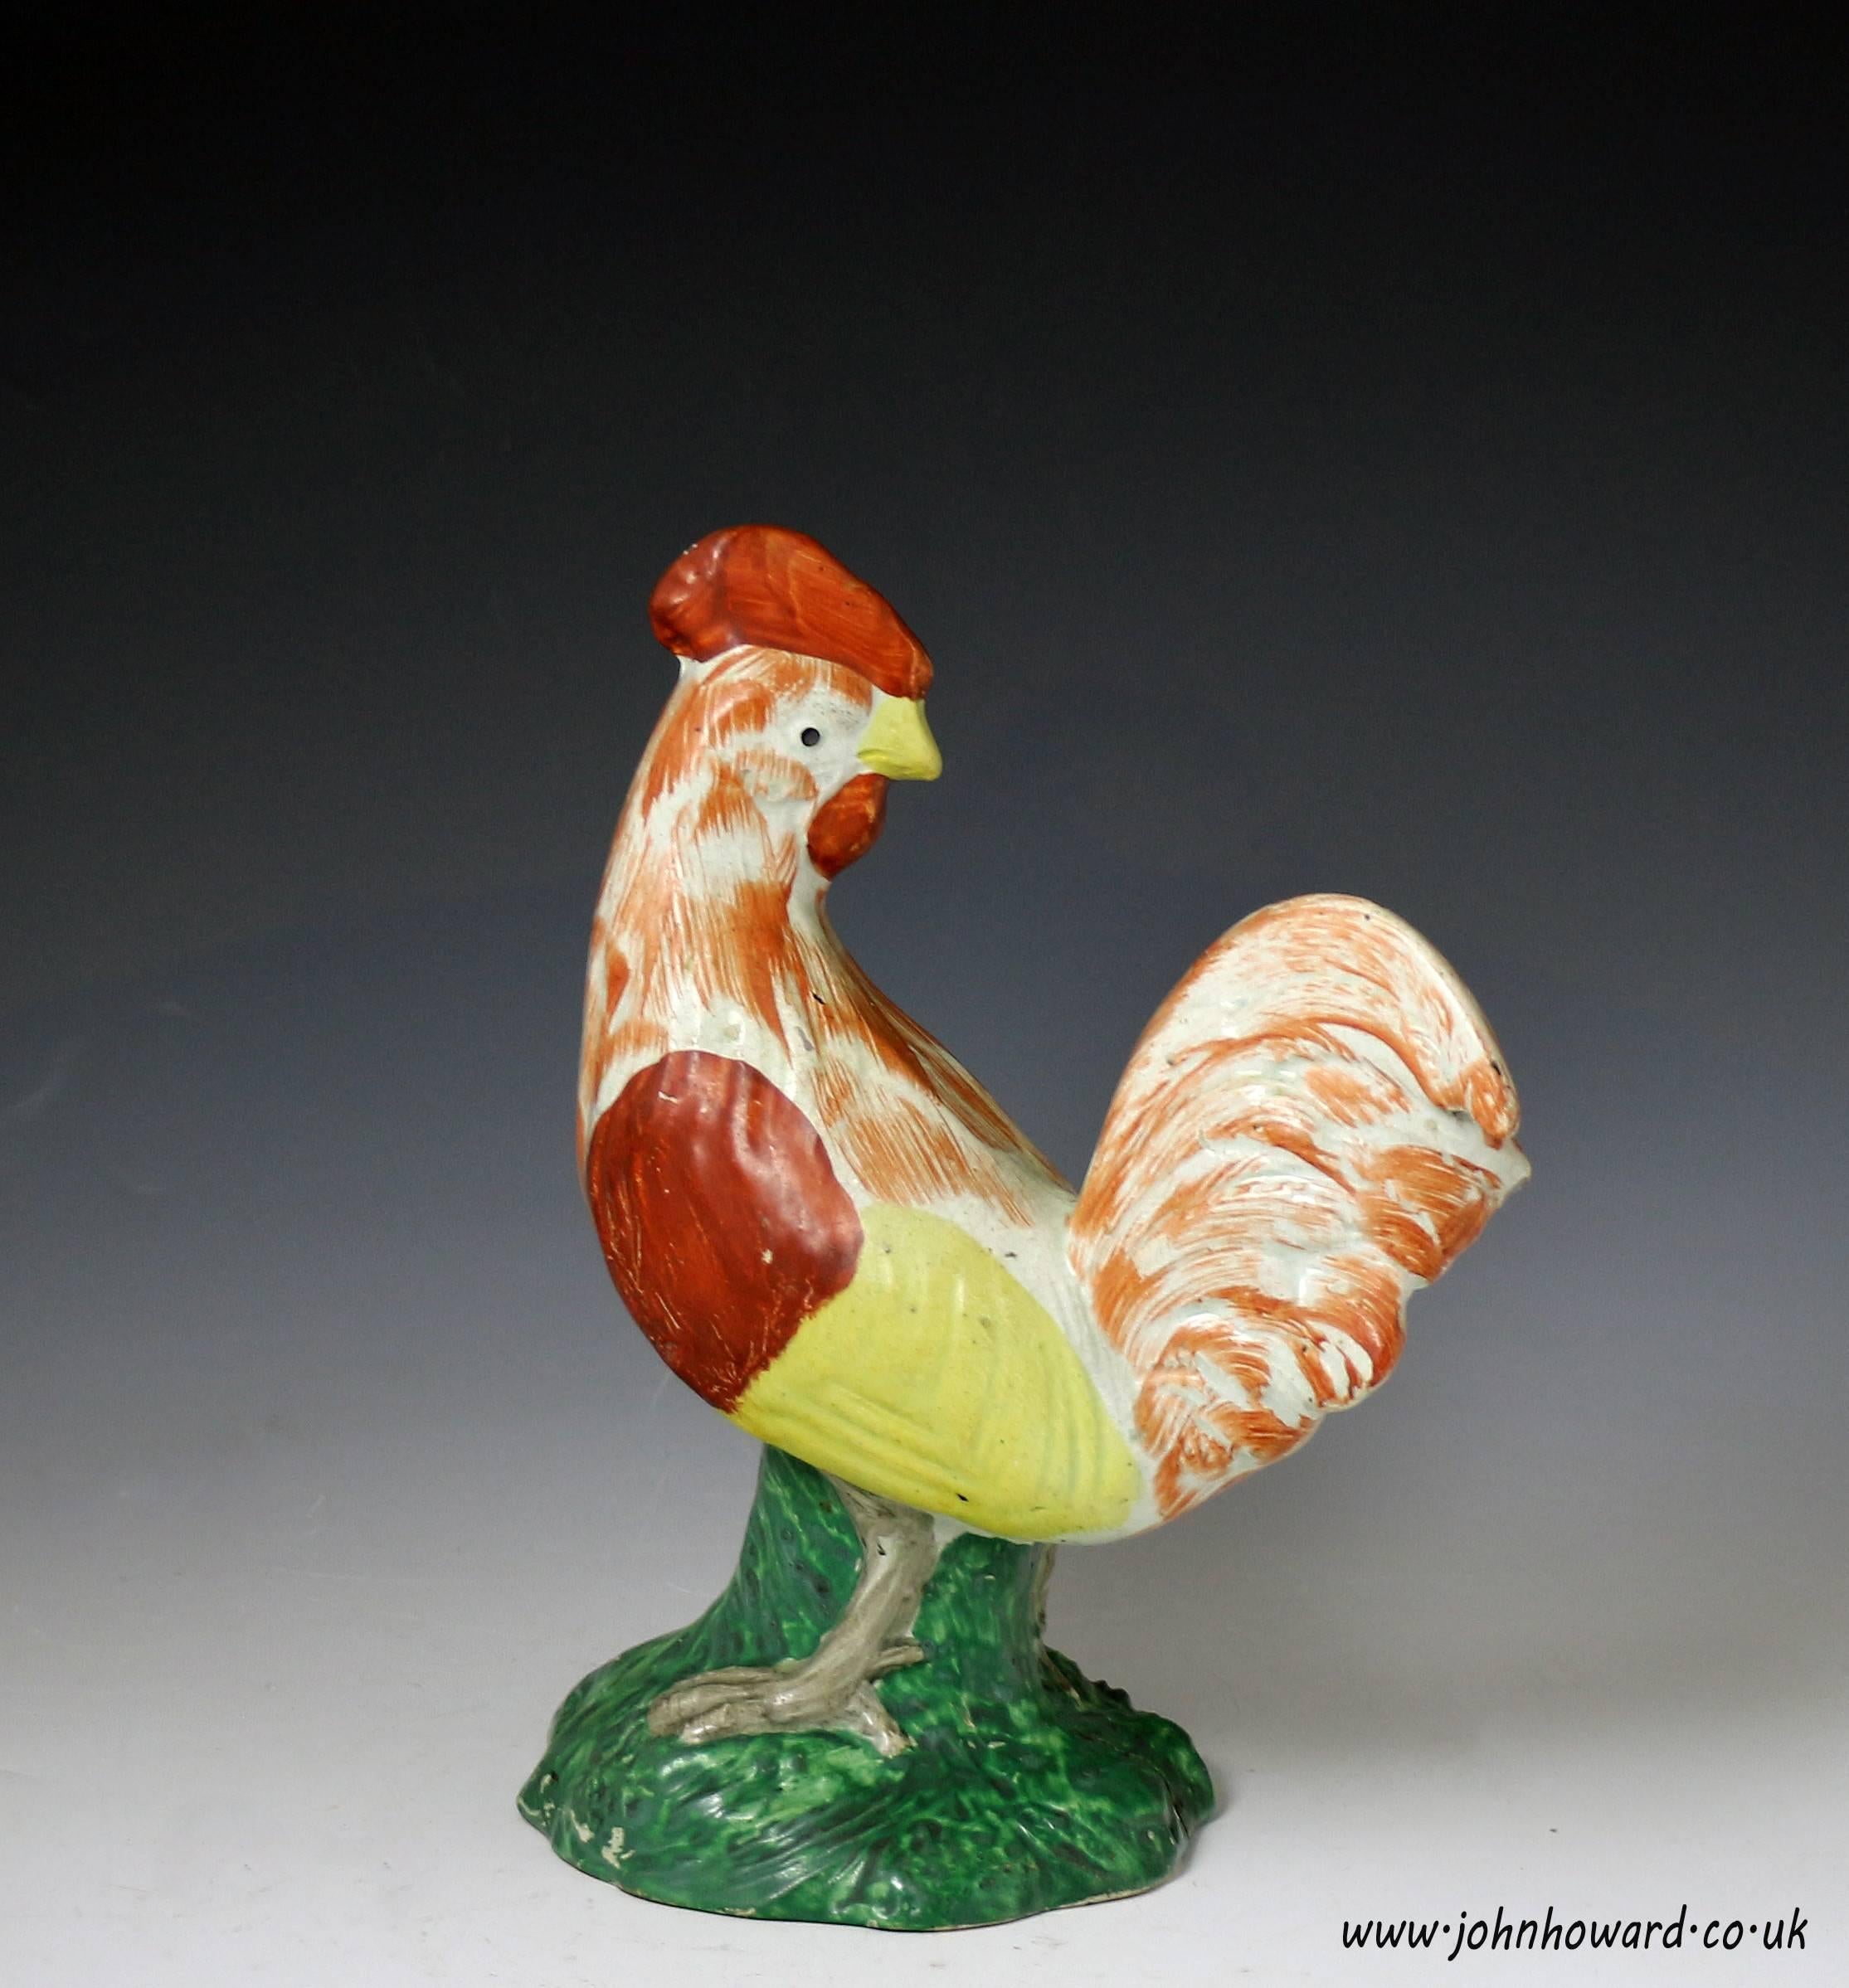 Antique early 19th century pearlware pottery figure of a standing rooster decorated in enamel colors. The naive modeling and color application enhances the boldness and character of the rooster.